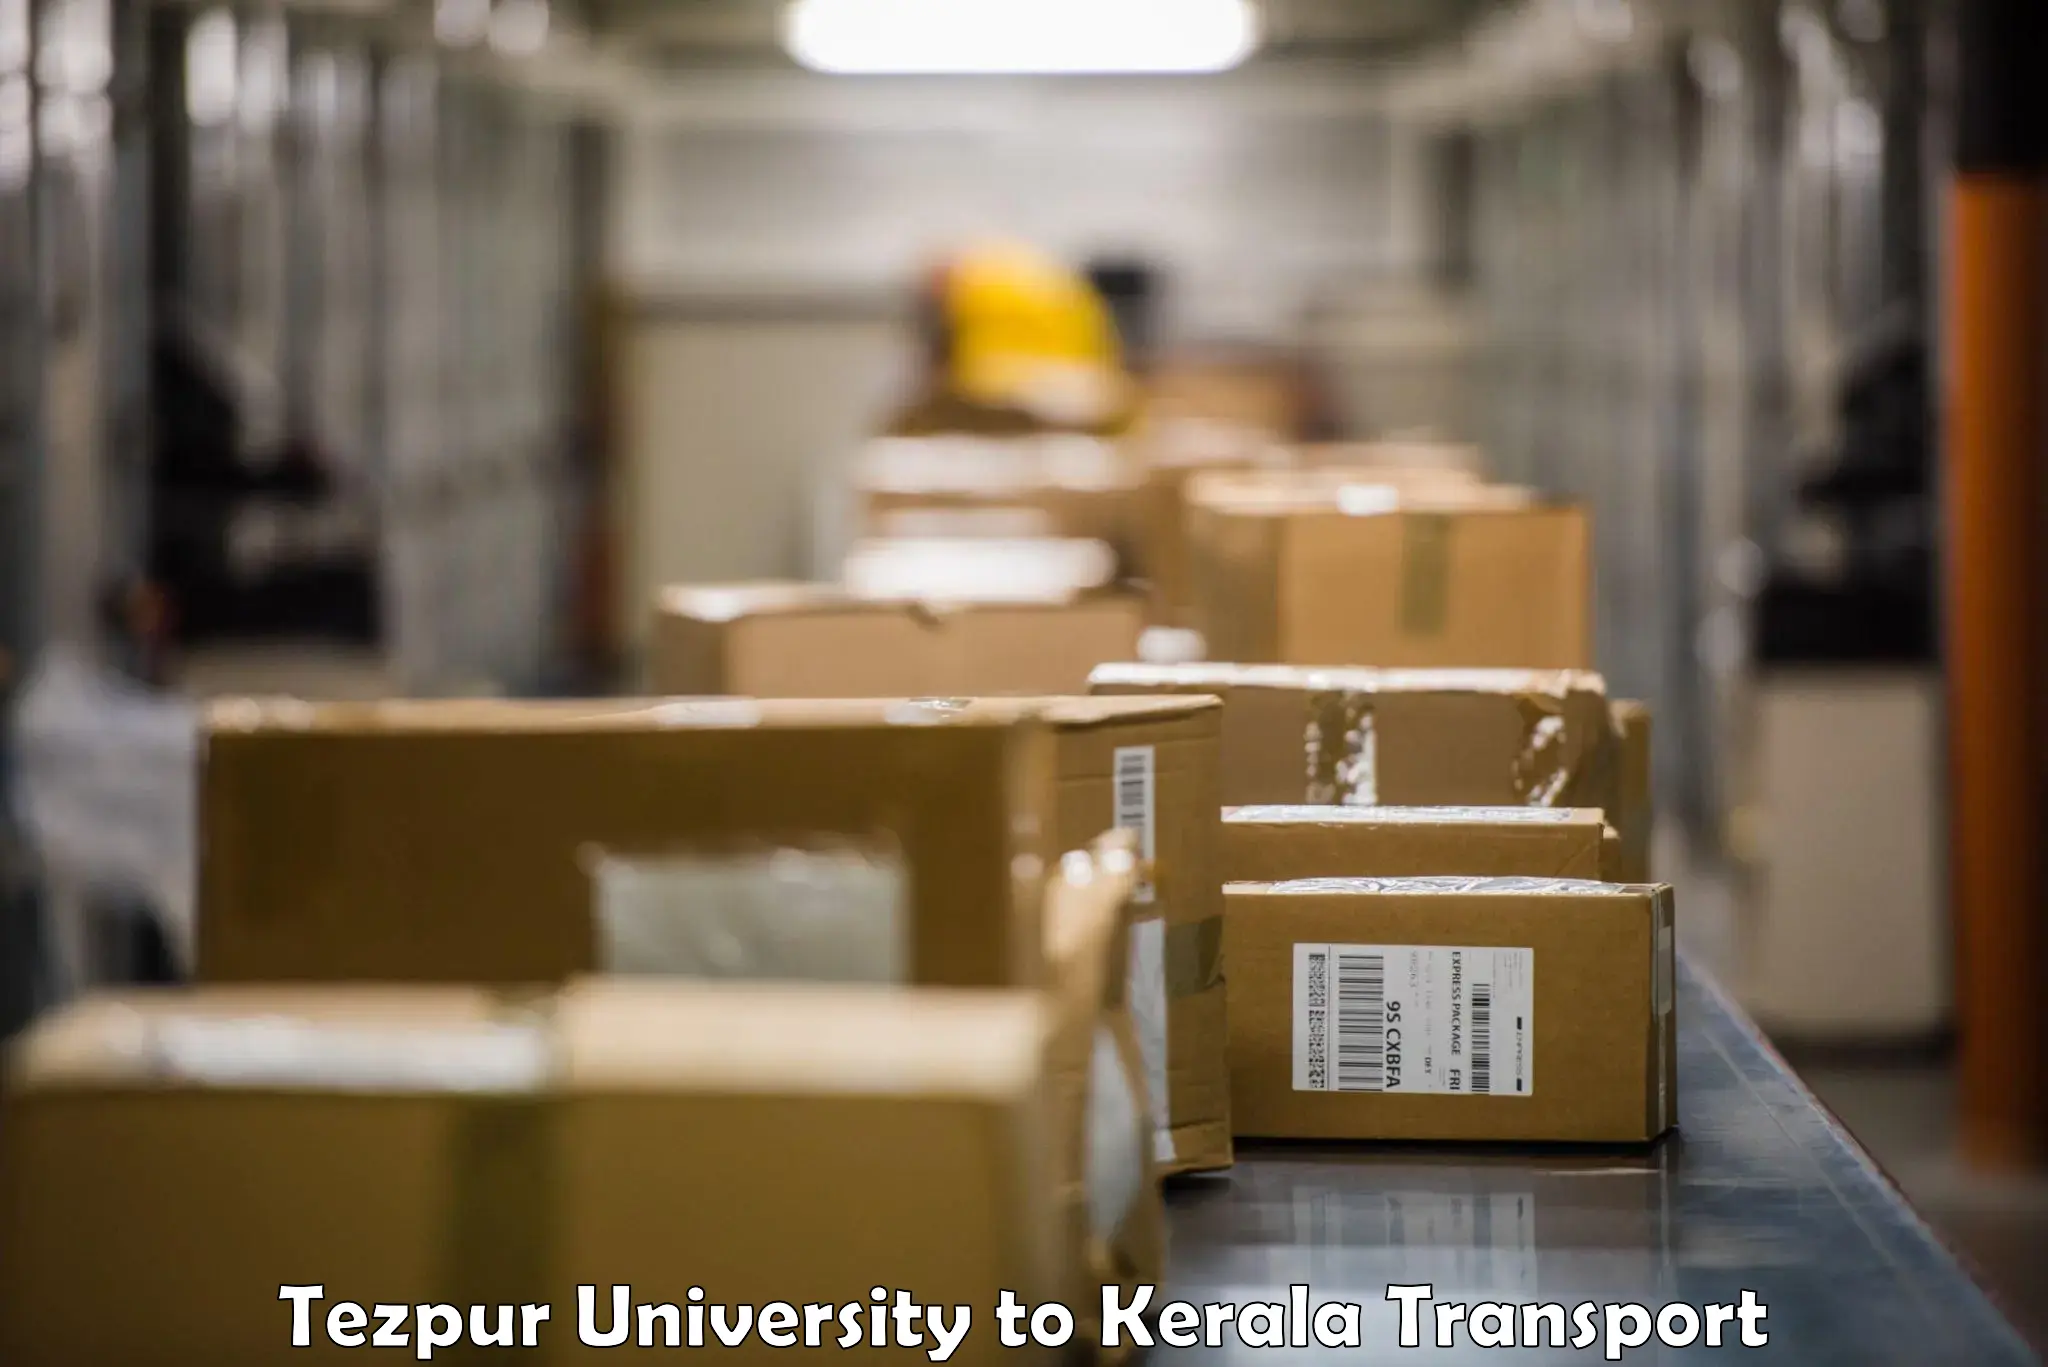 Air freight transport services Tezpur University to Cochin University of Science and Technology